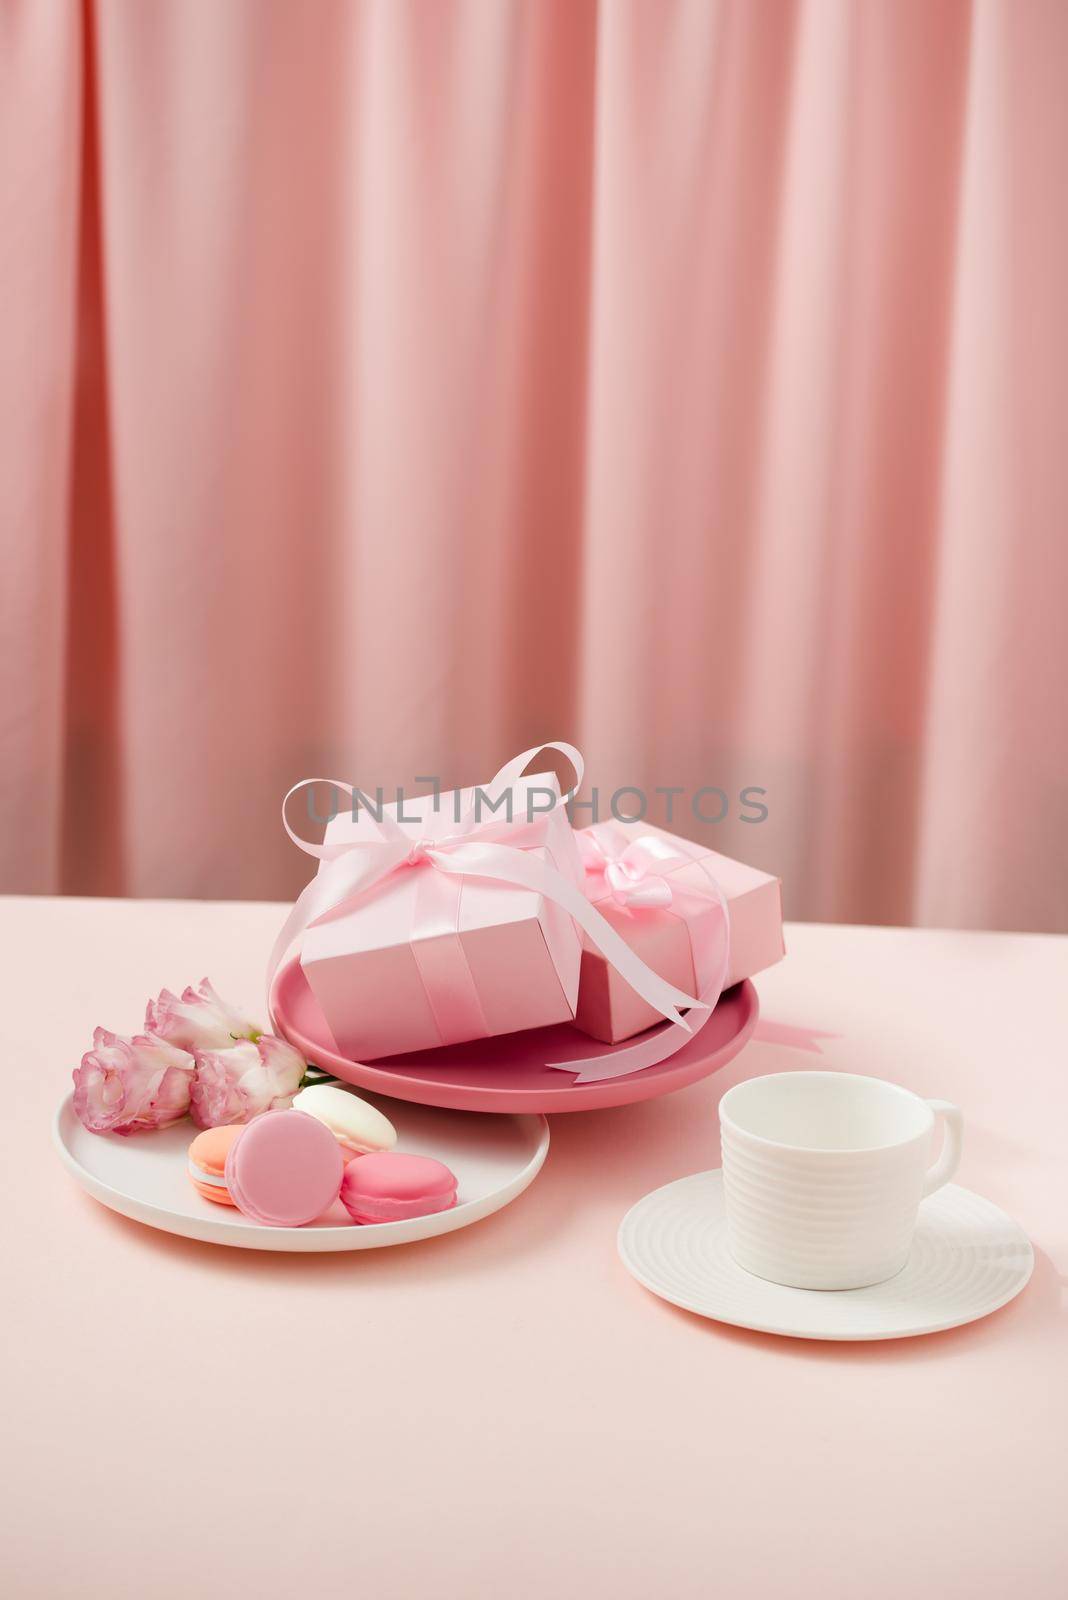 Happy woman/mother"s Day image of a coffee or tea cup and lisianthus flower with macaroon and gifts beside on drapes of pink.  by makidotvn